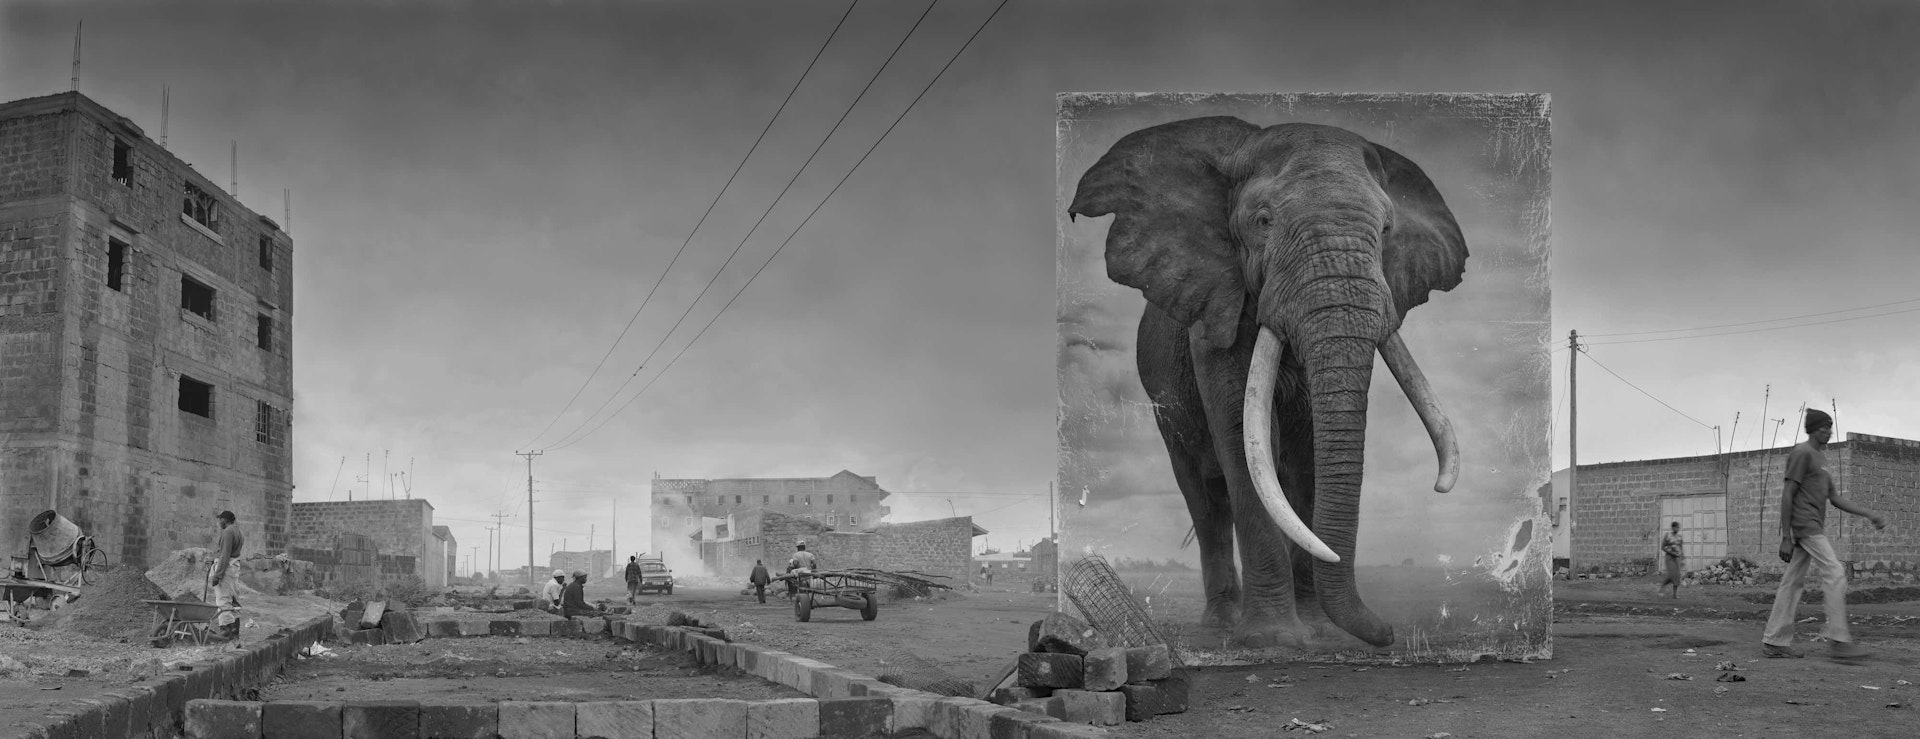 'Road With Elephant'